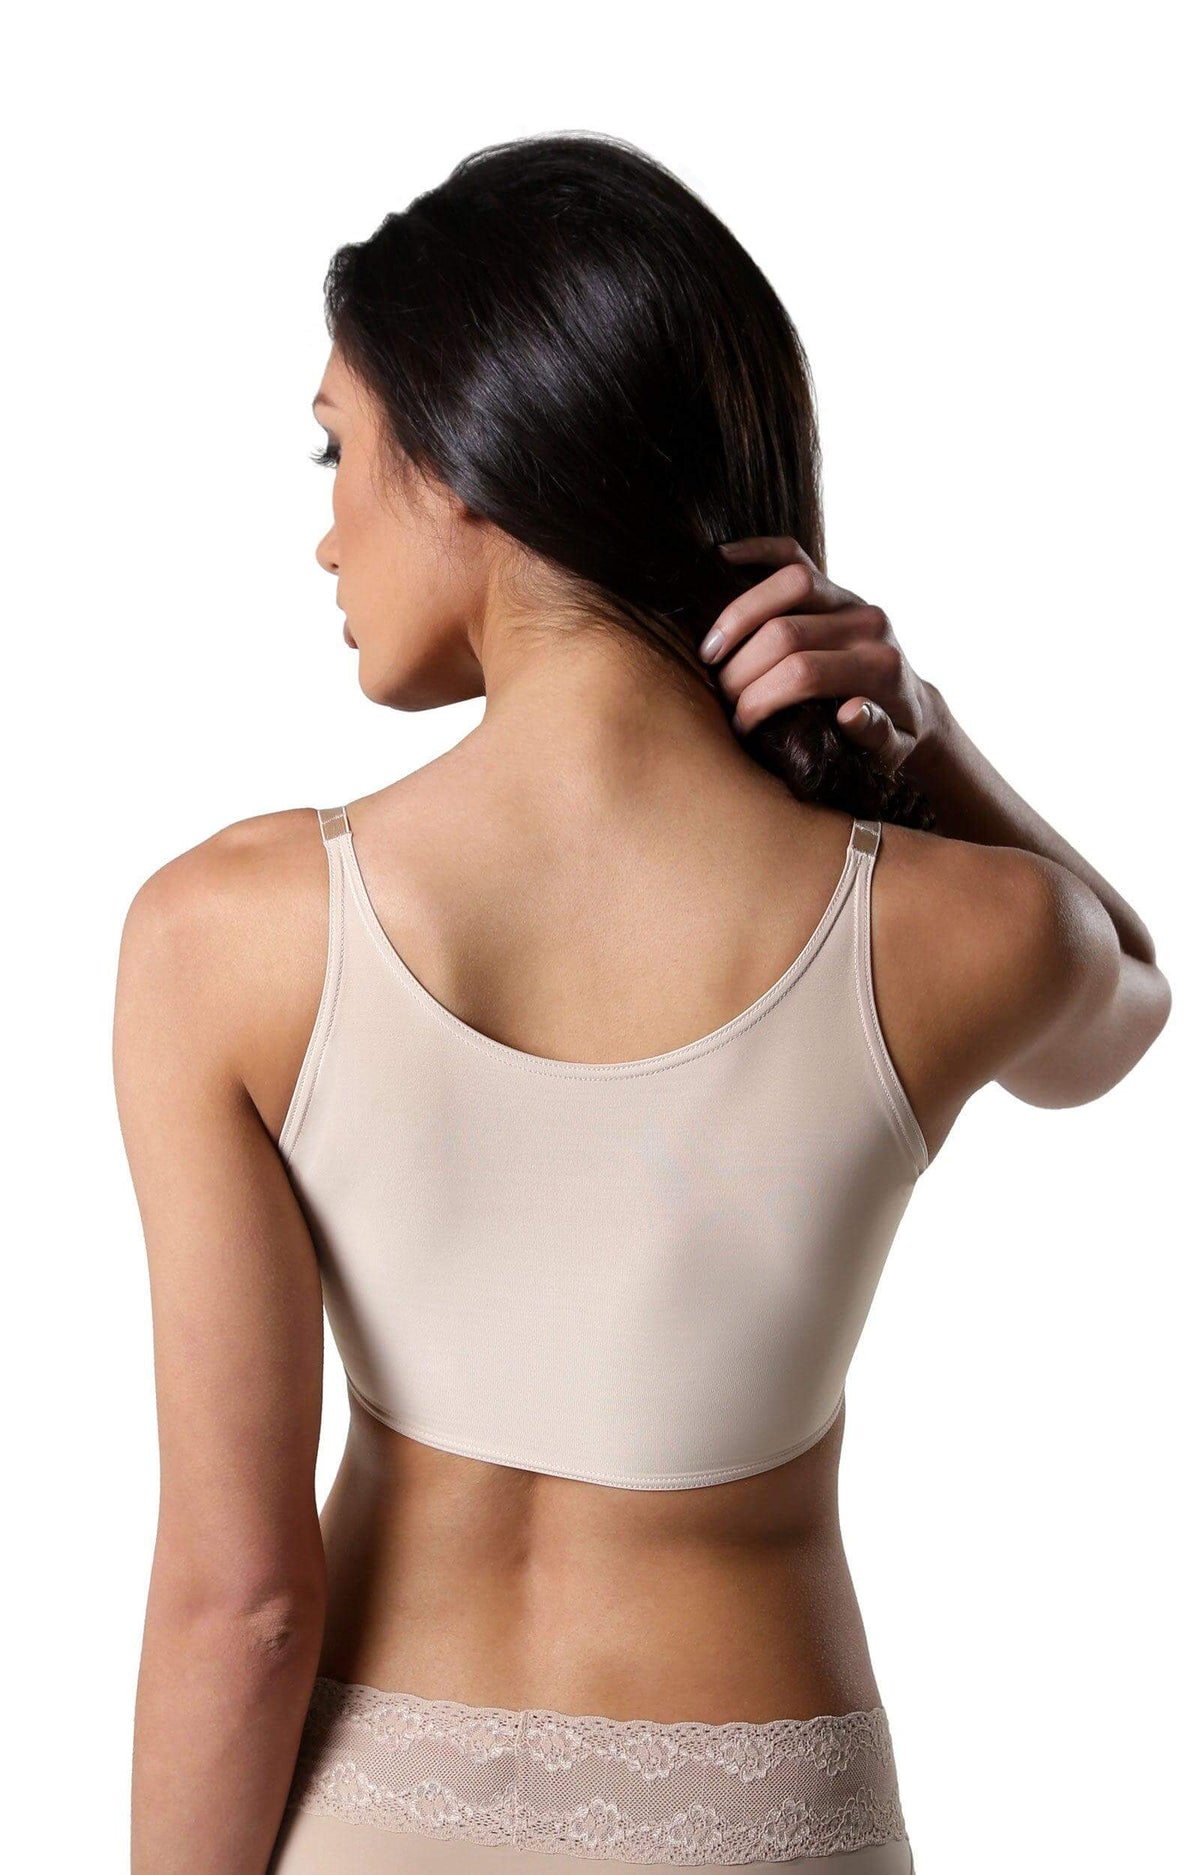 Shapeez yeilds a smooth back and eliminated visible bra lines